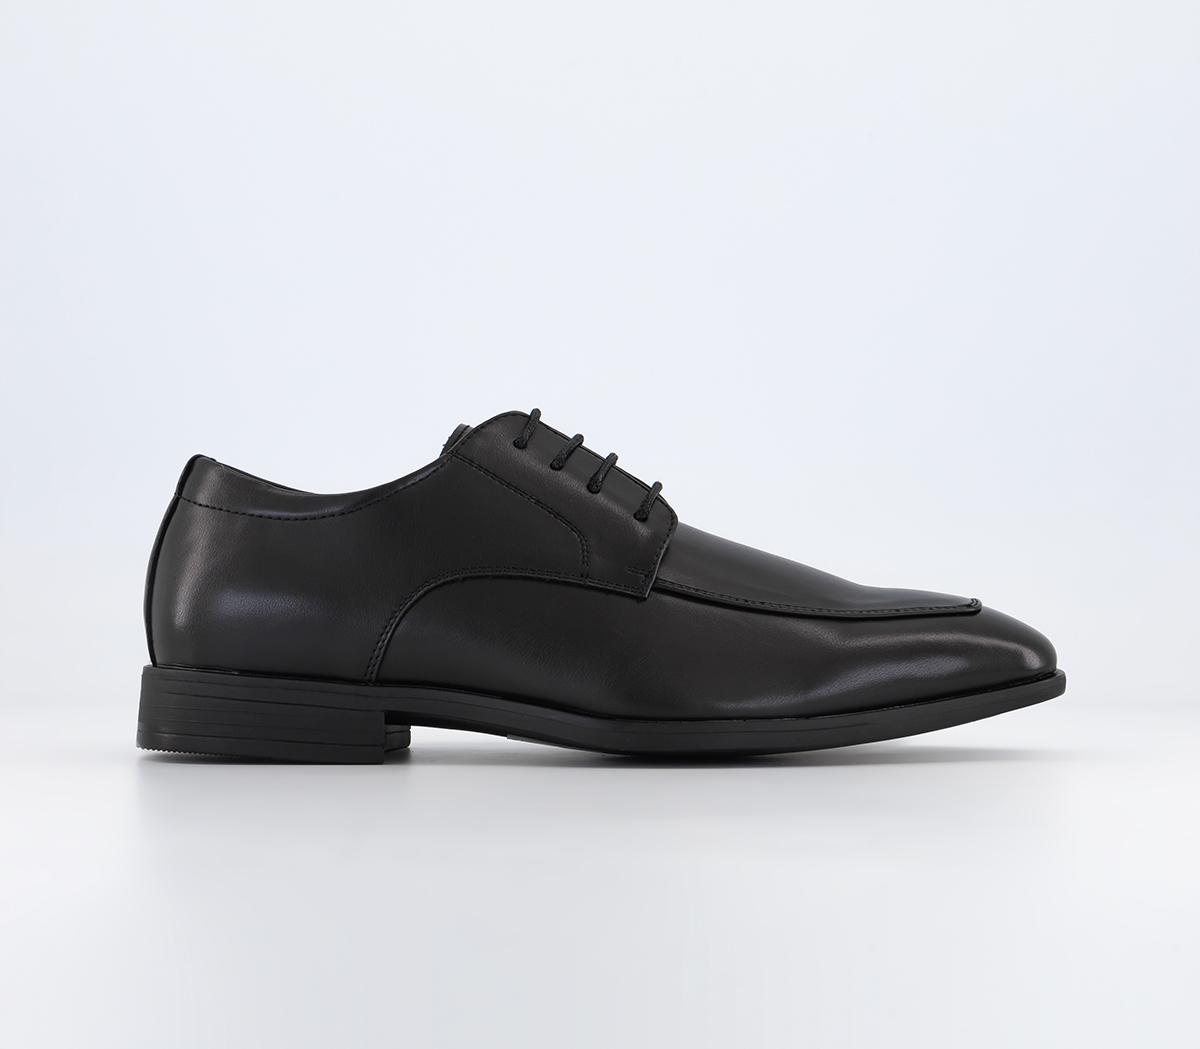 OFFICEMclean Stitched Apron Derby Shoes Black